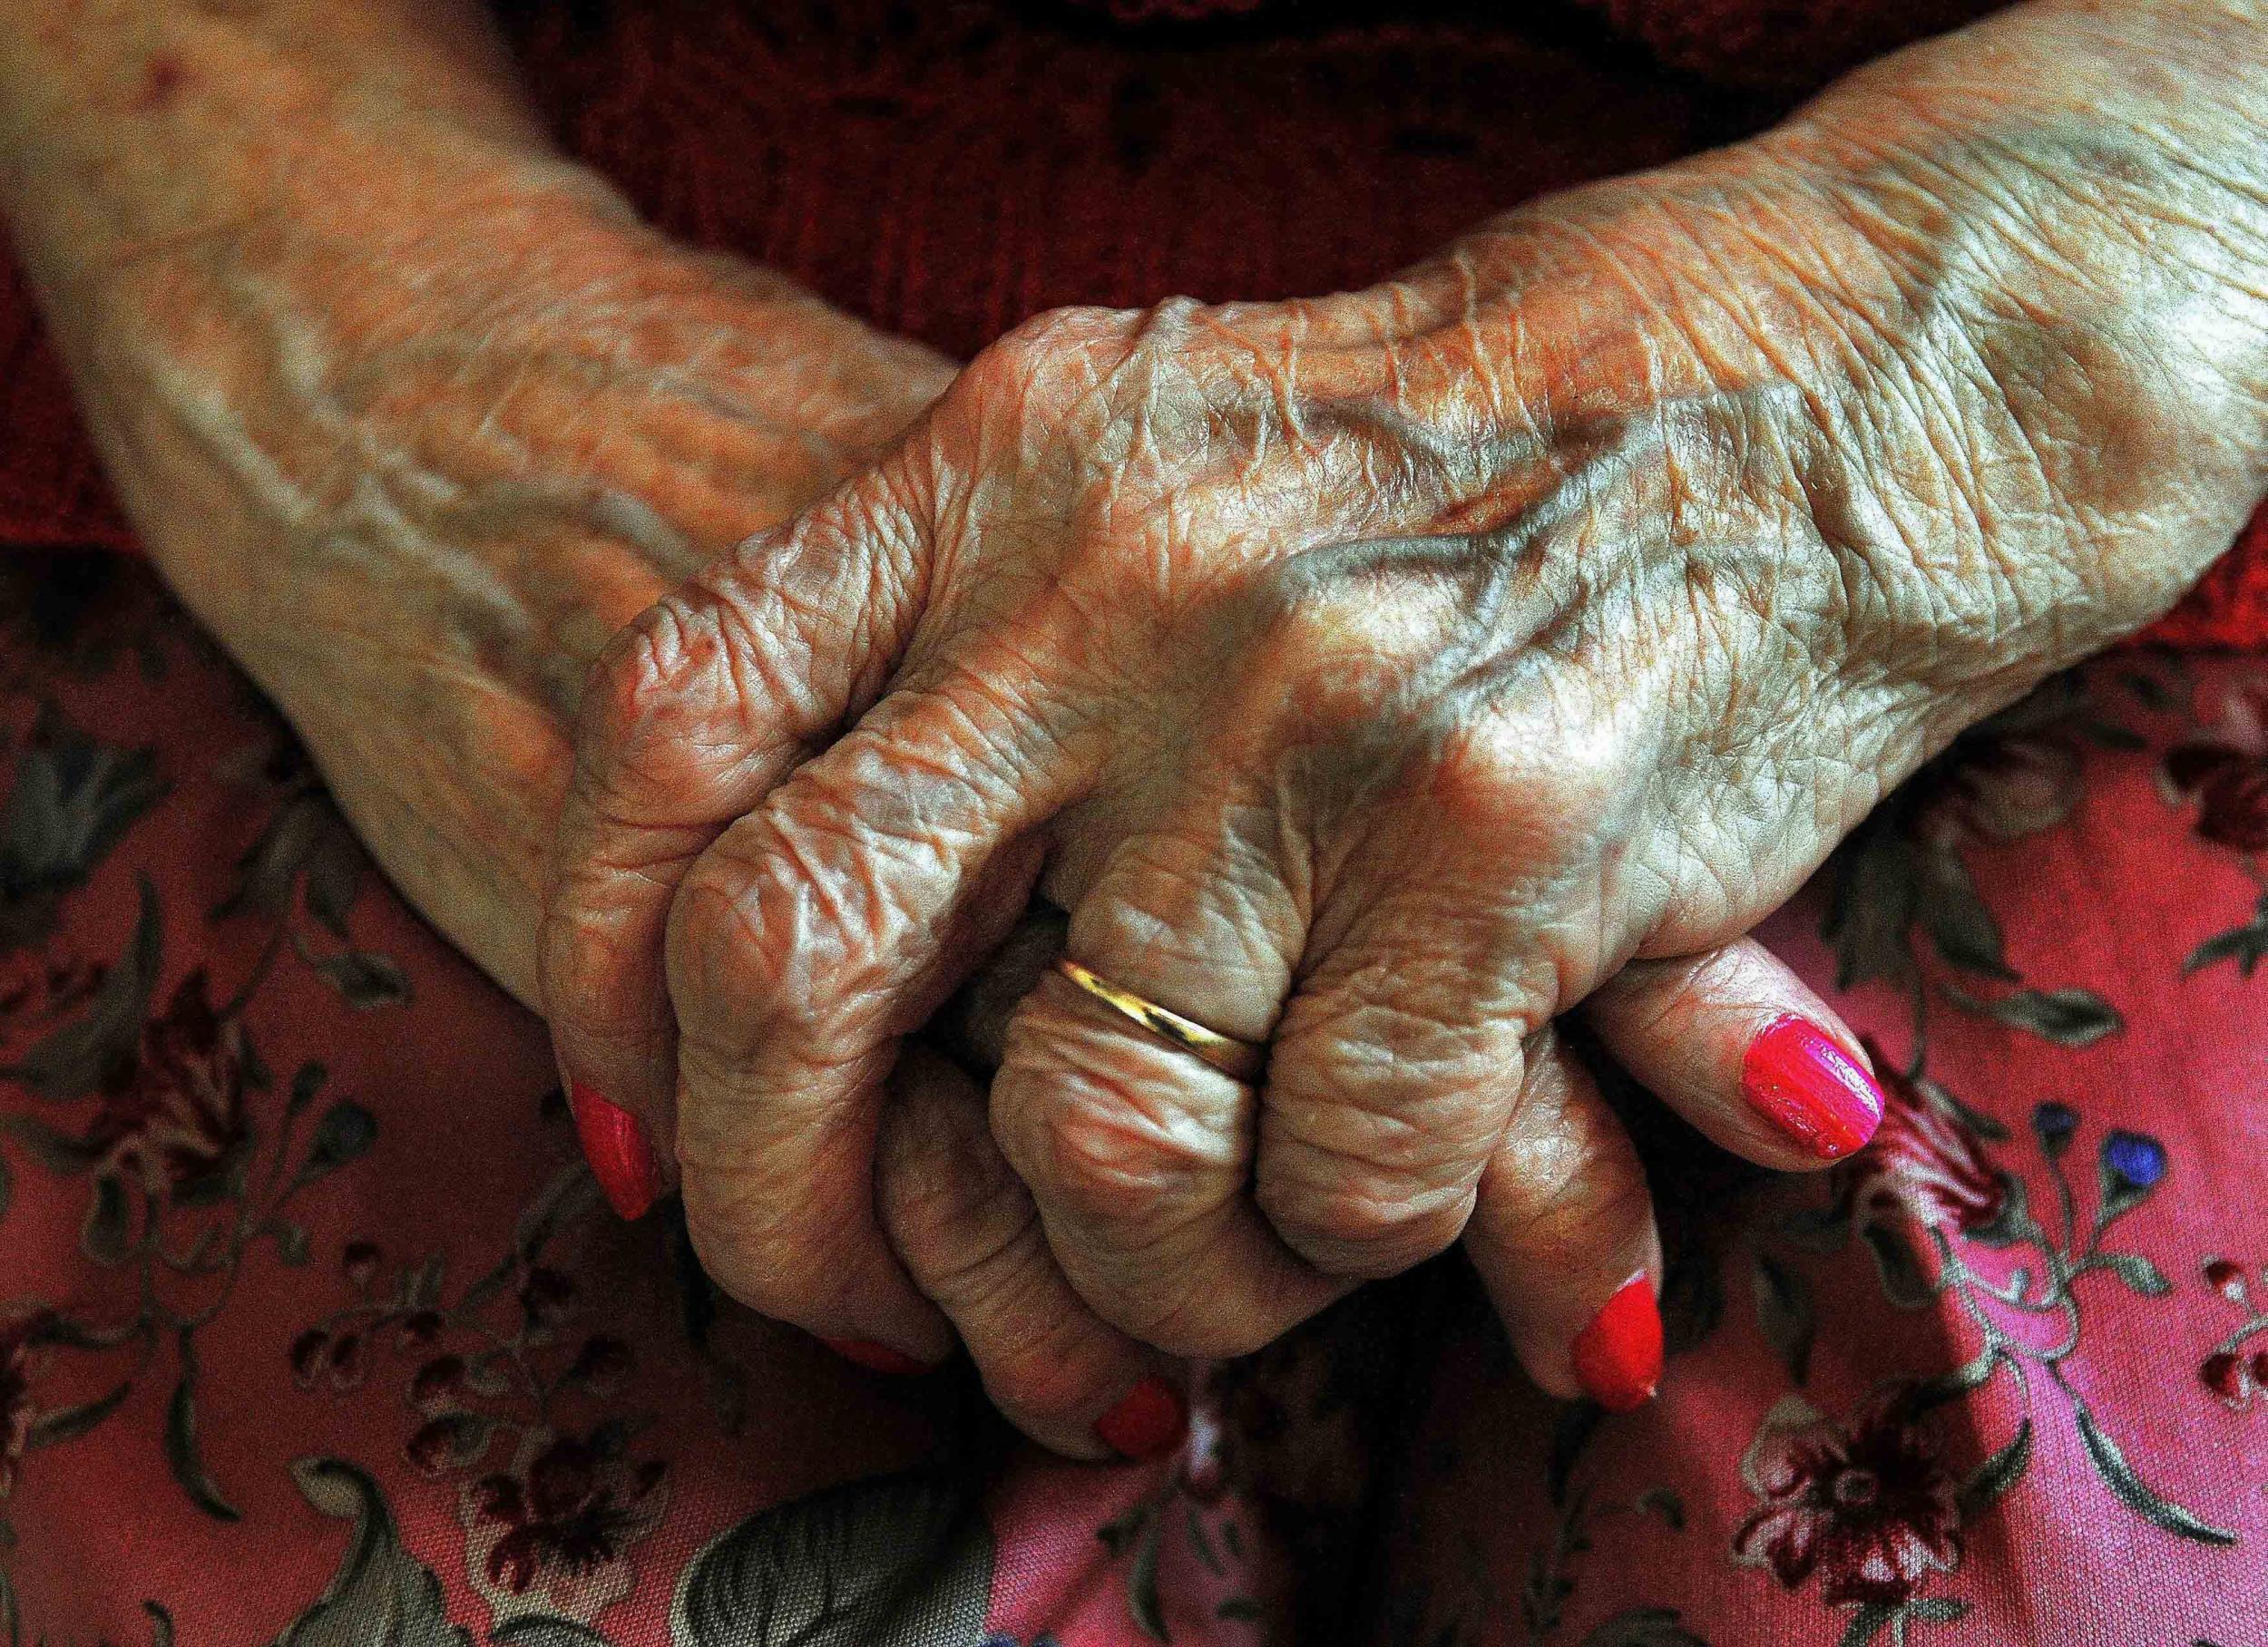 Funding shortfall for social care is expected to be £2.5bn in the next year alone